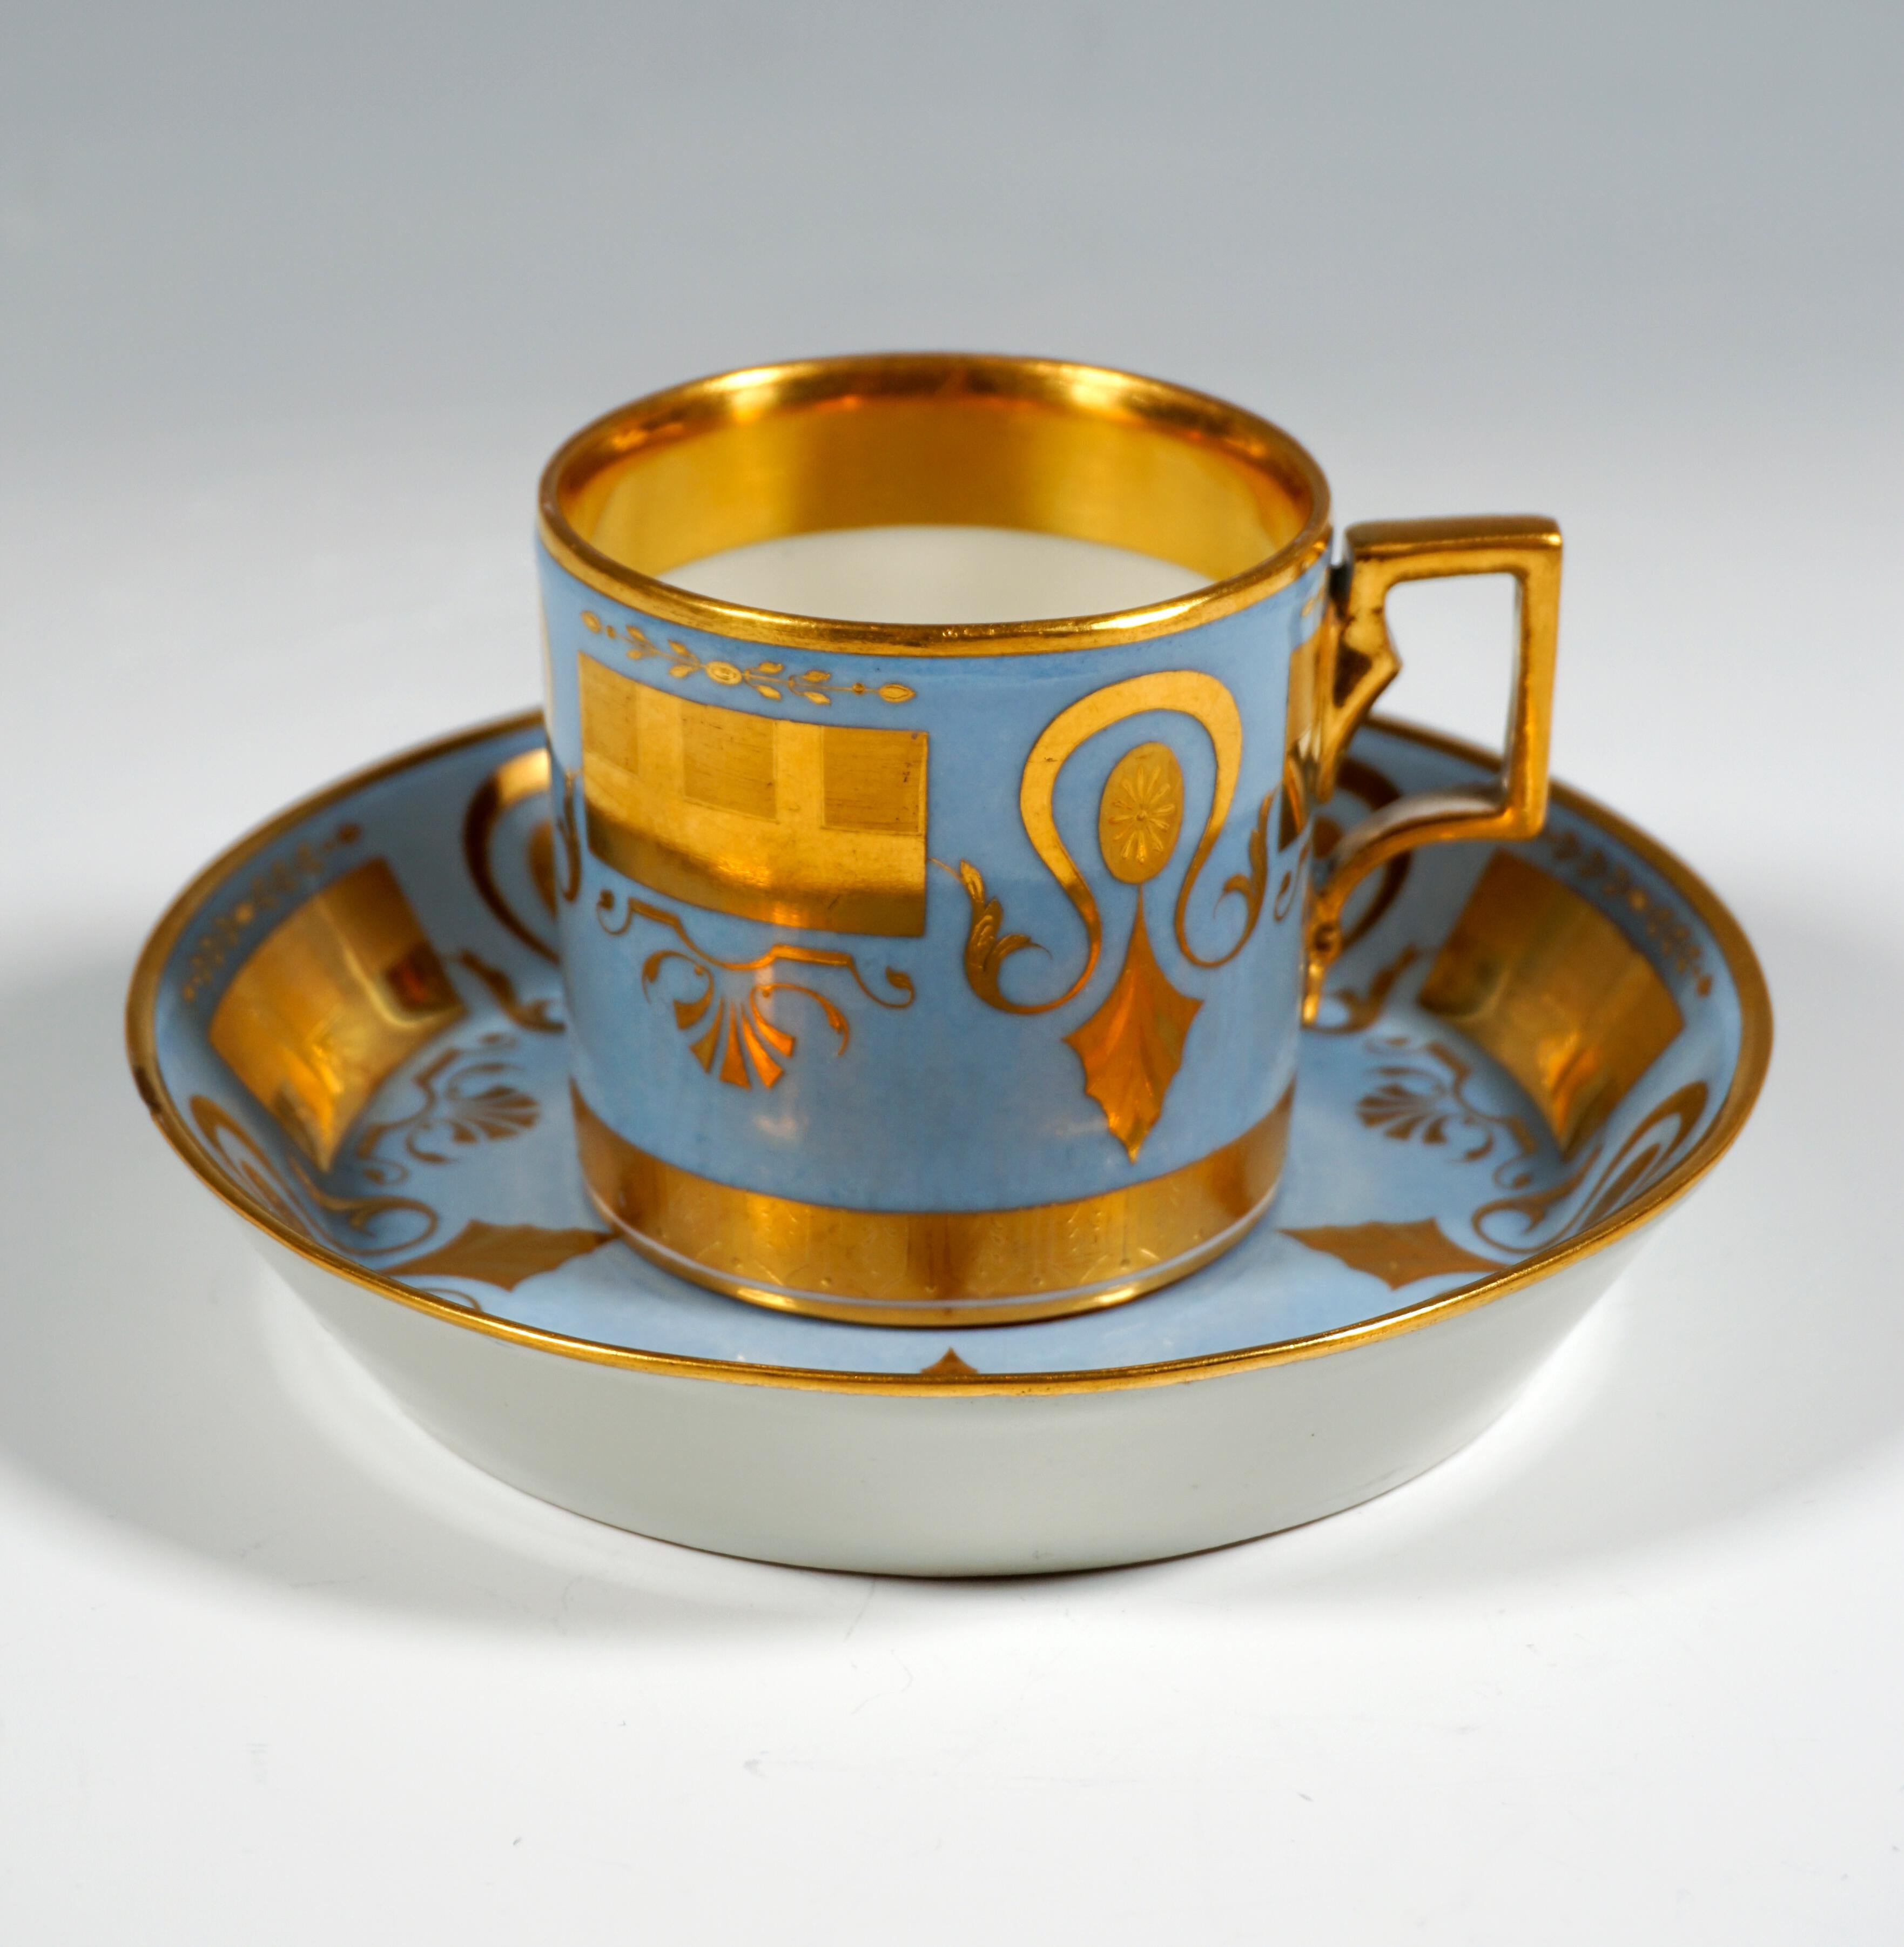 Cylindrical cup, the outside provided with a light blue background, thereon plentiful gold on gold painting in Empire style: horseshoe-shaped loops with feathered leaf ends enclosing small oval medallions with leaves attached below, rectangular